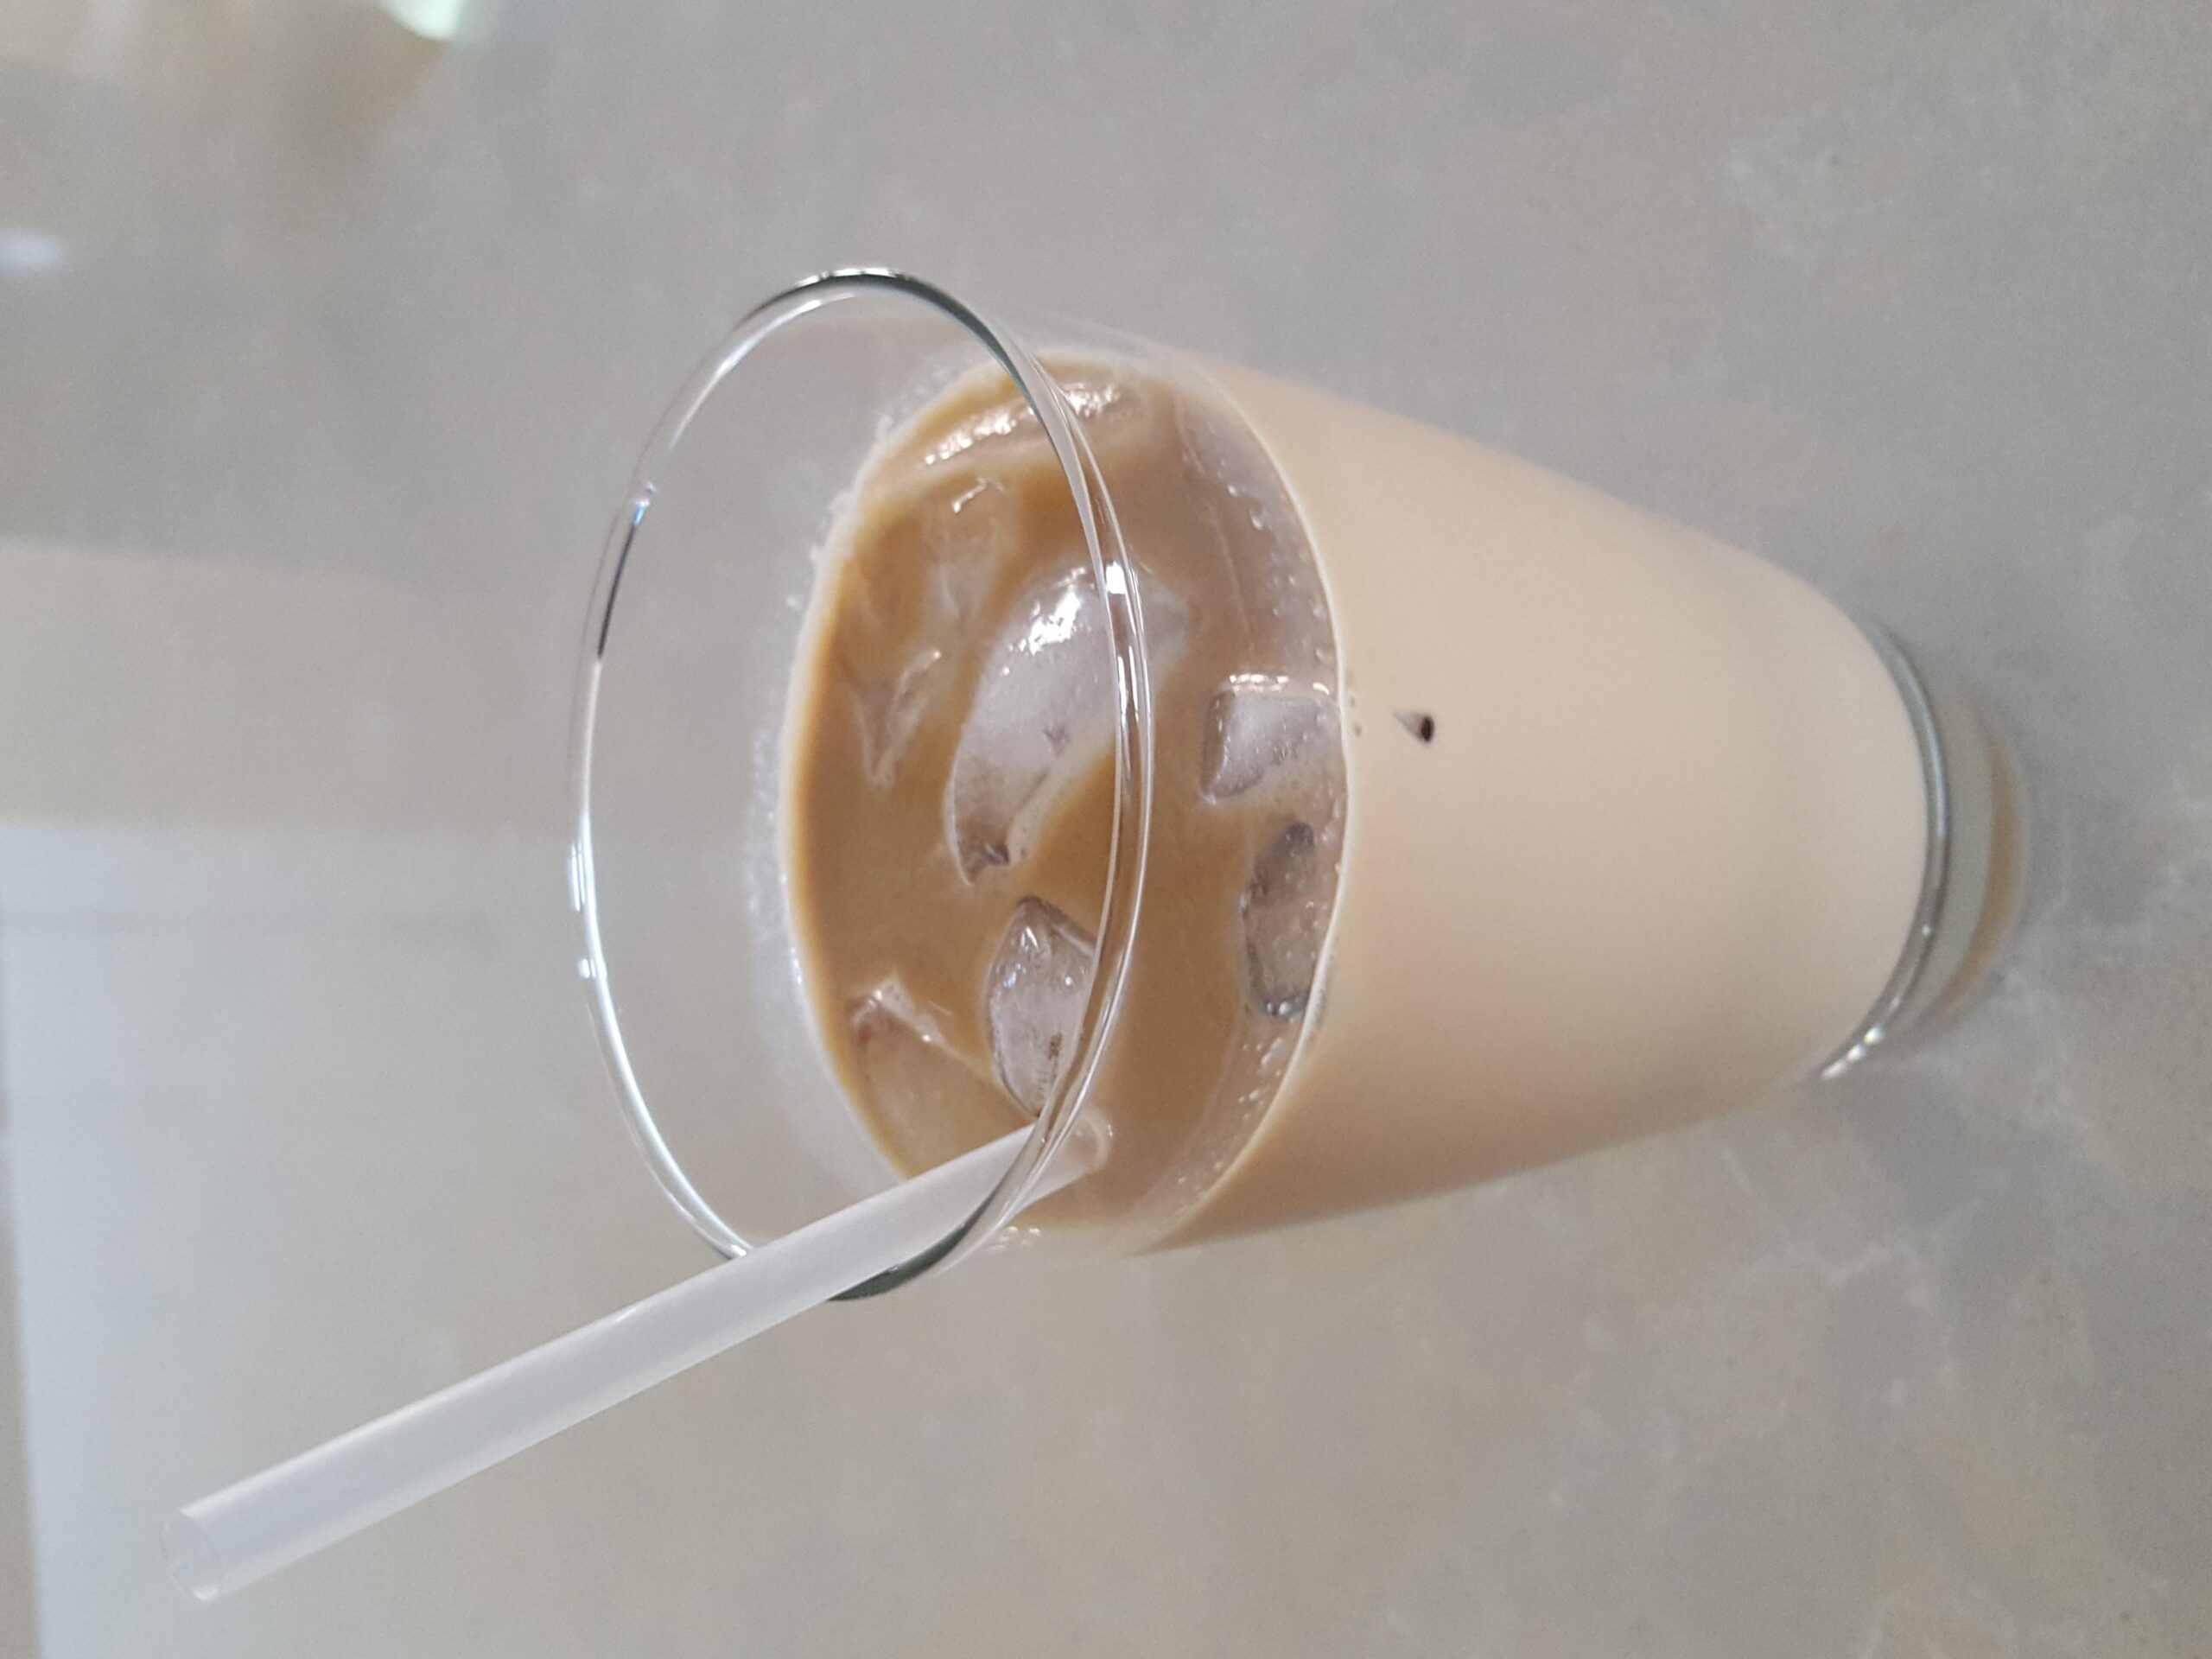 Delicious and Refreshing: DIY Iced Coffee Recipe